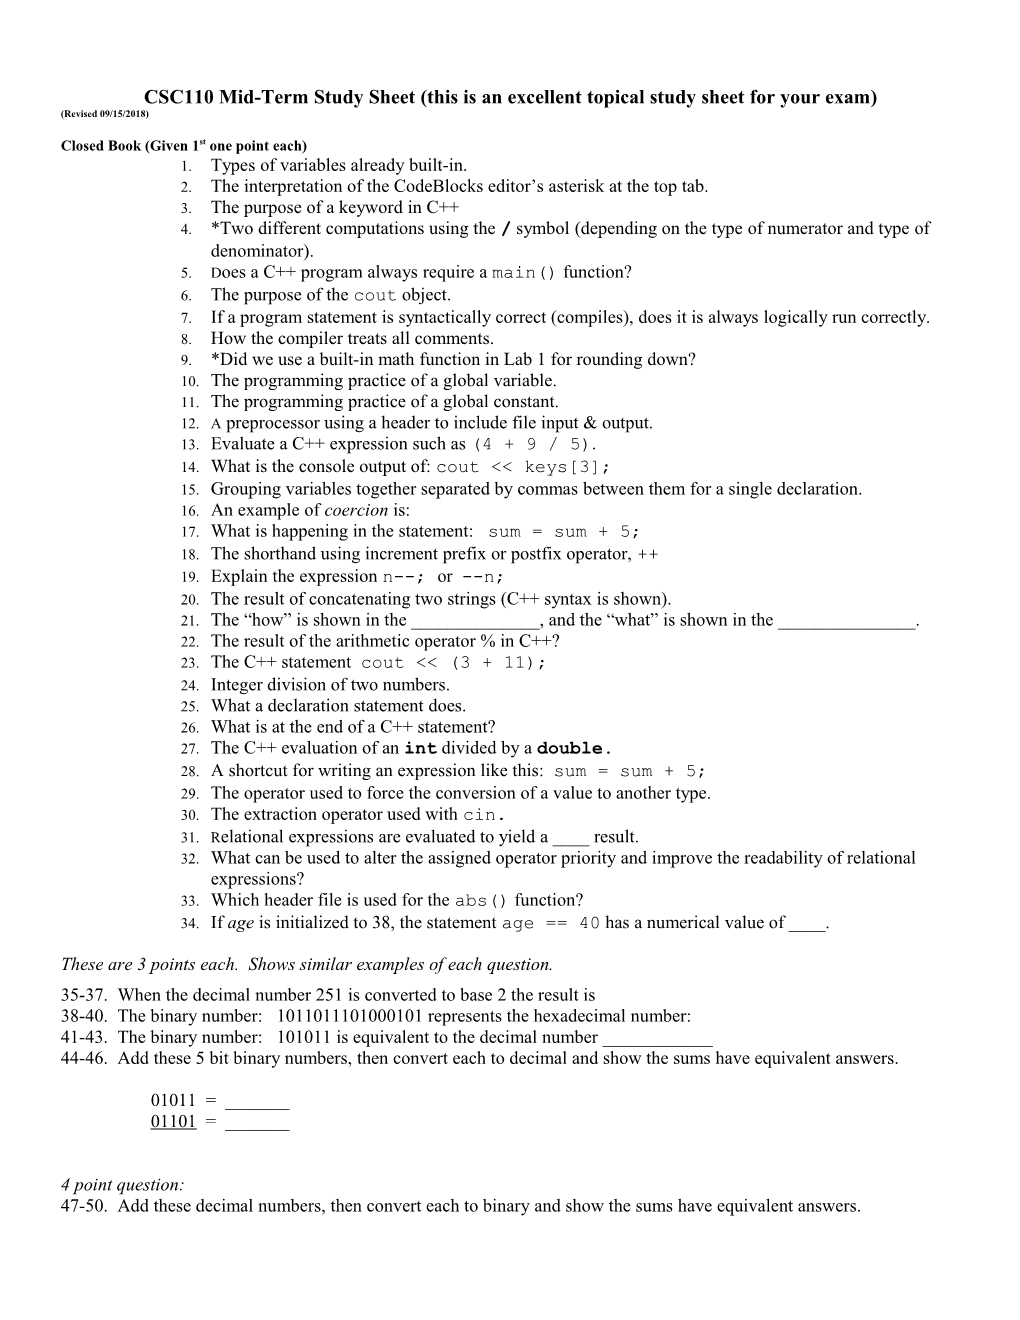 CSC110 Mid-Term Study Sheet(This Is an Excellent Topical Study Sheet for Your Exam)